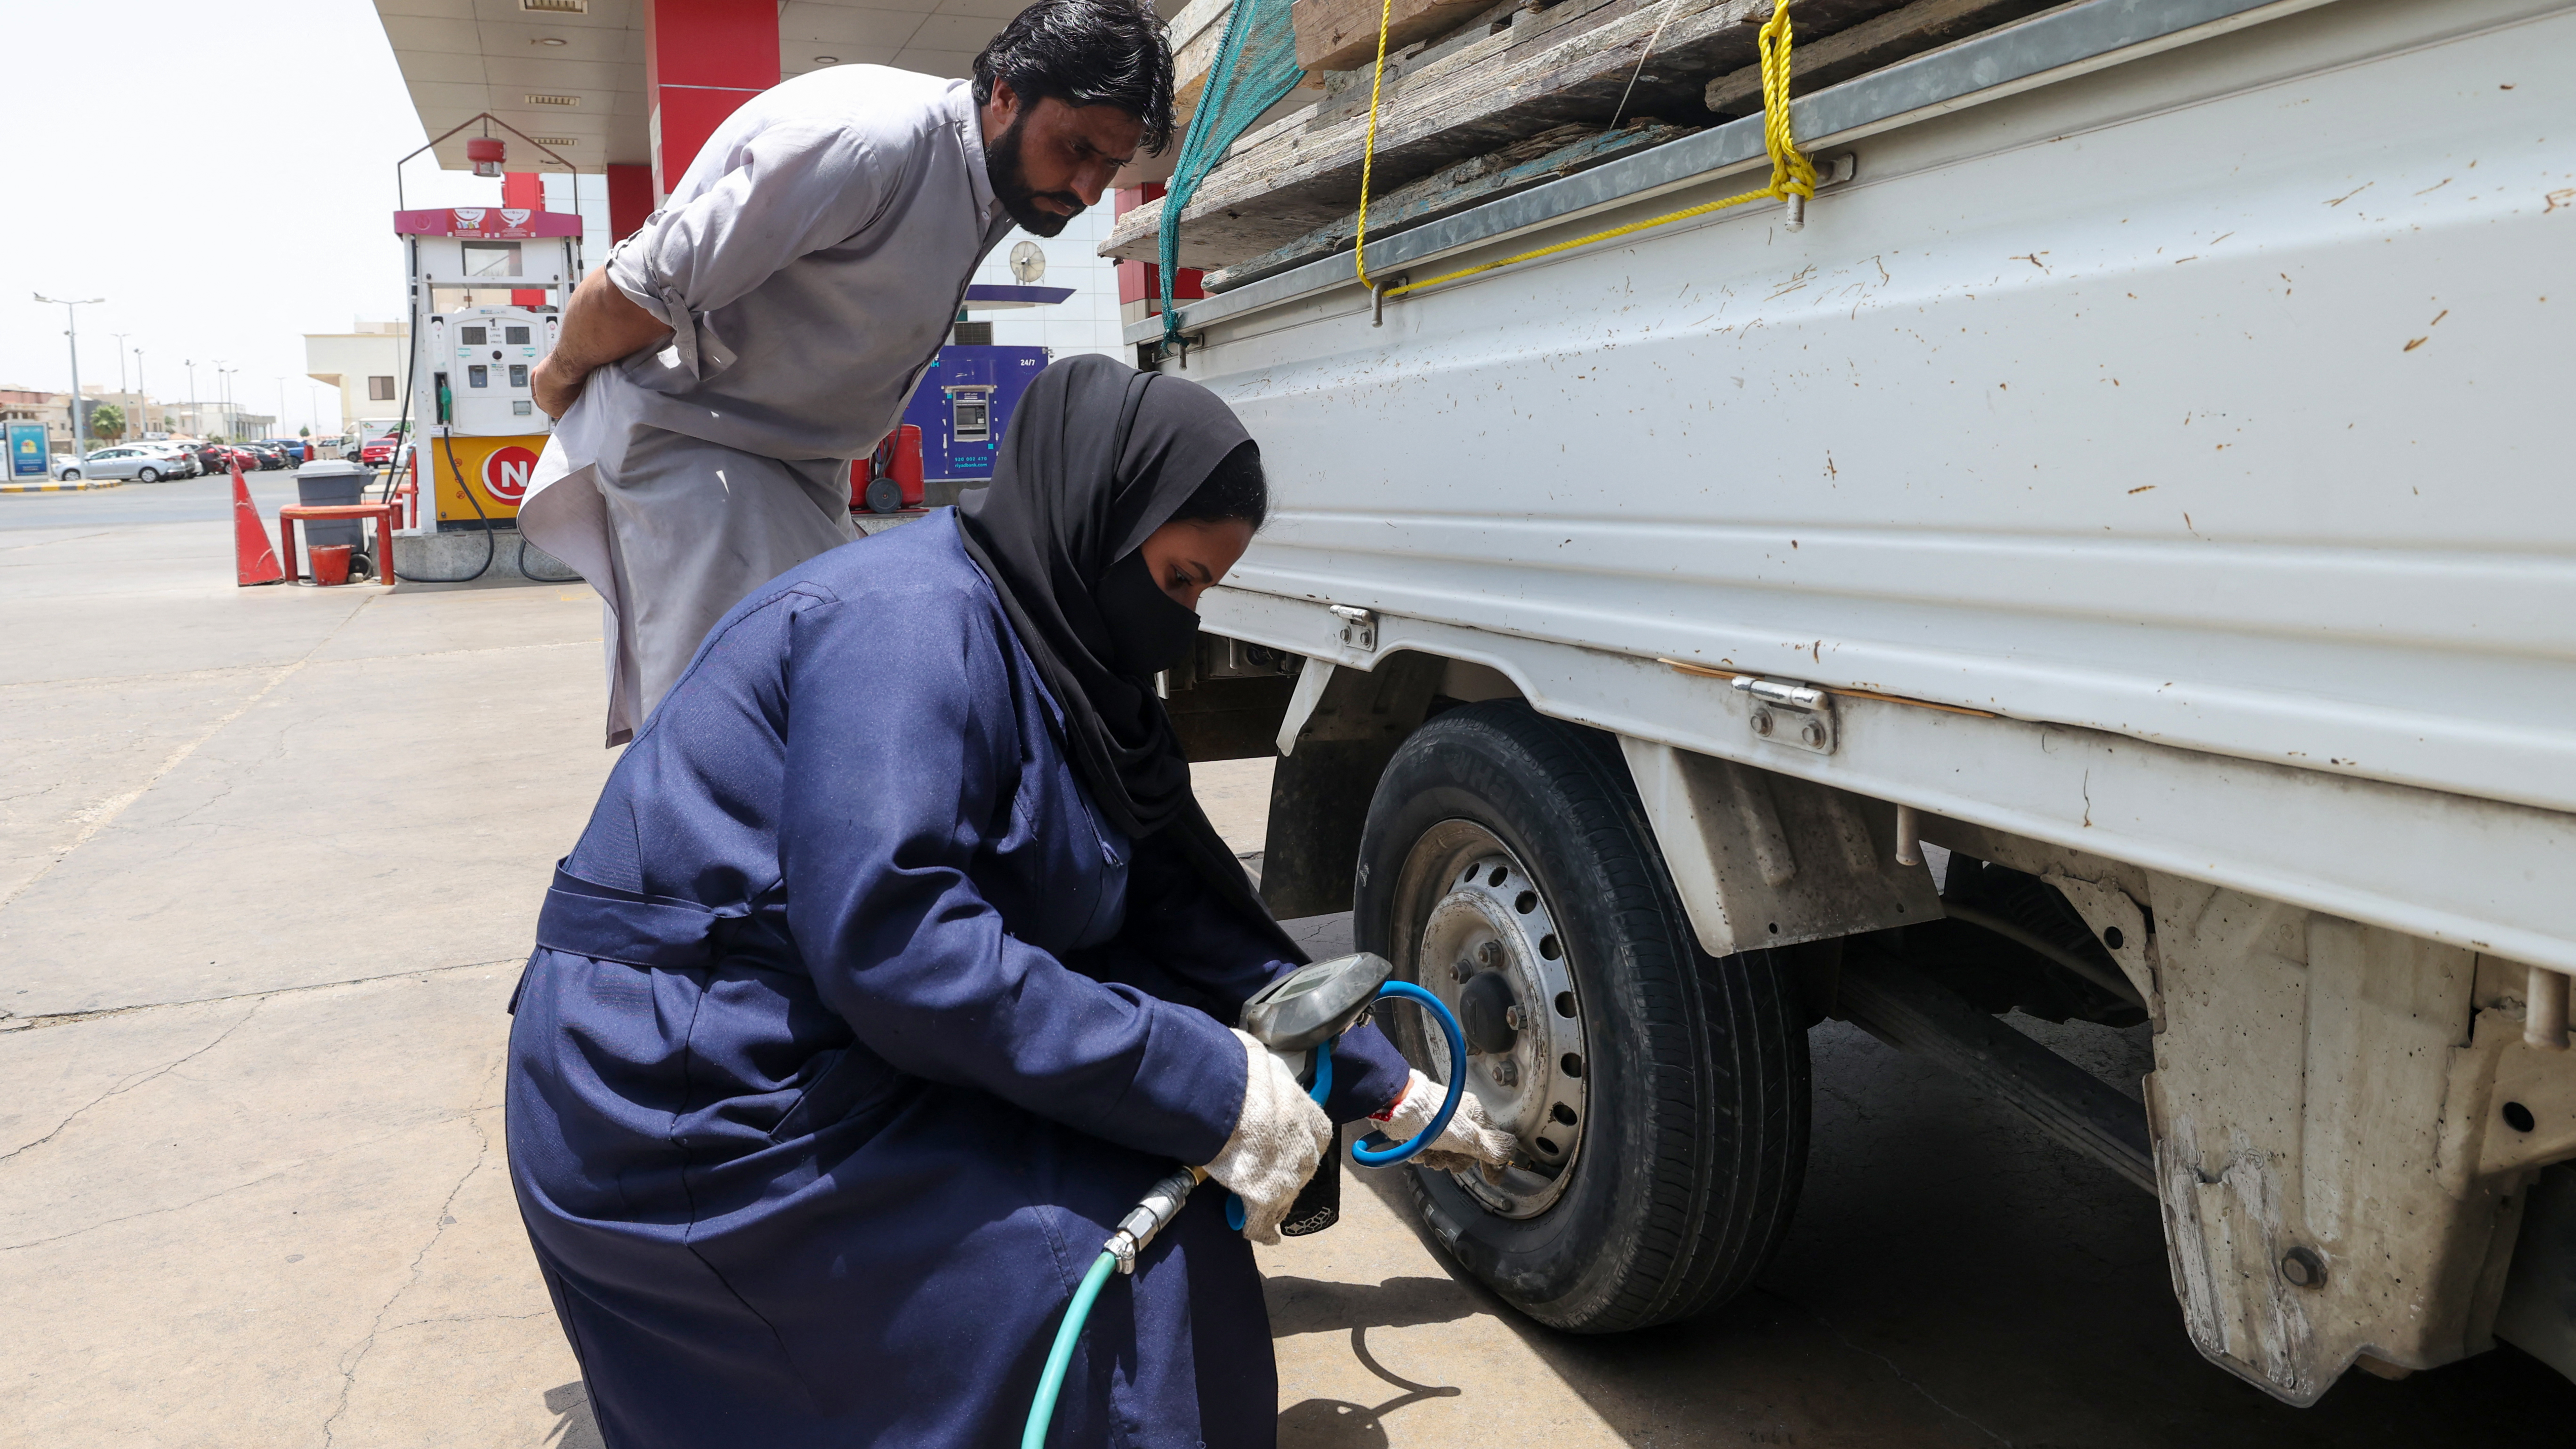 A male customer watches over Ghada Ahmed as she works on his truck (photo: Fayez Nureldine/AFP)